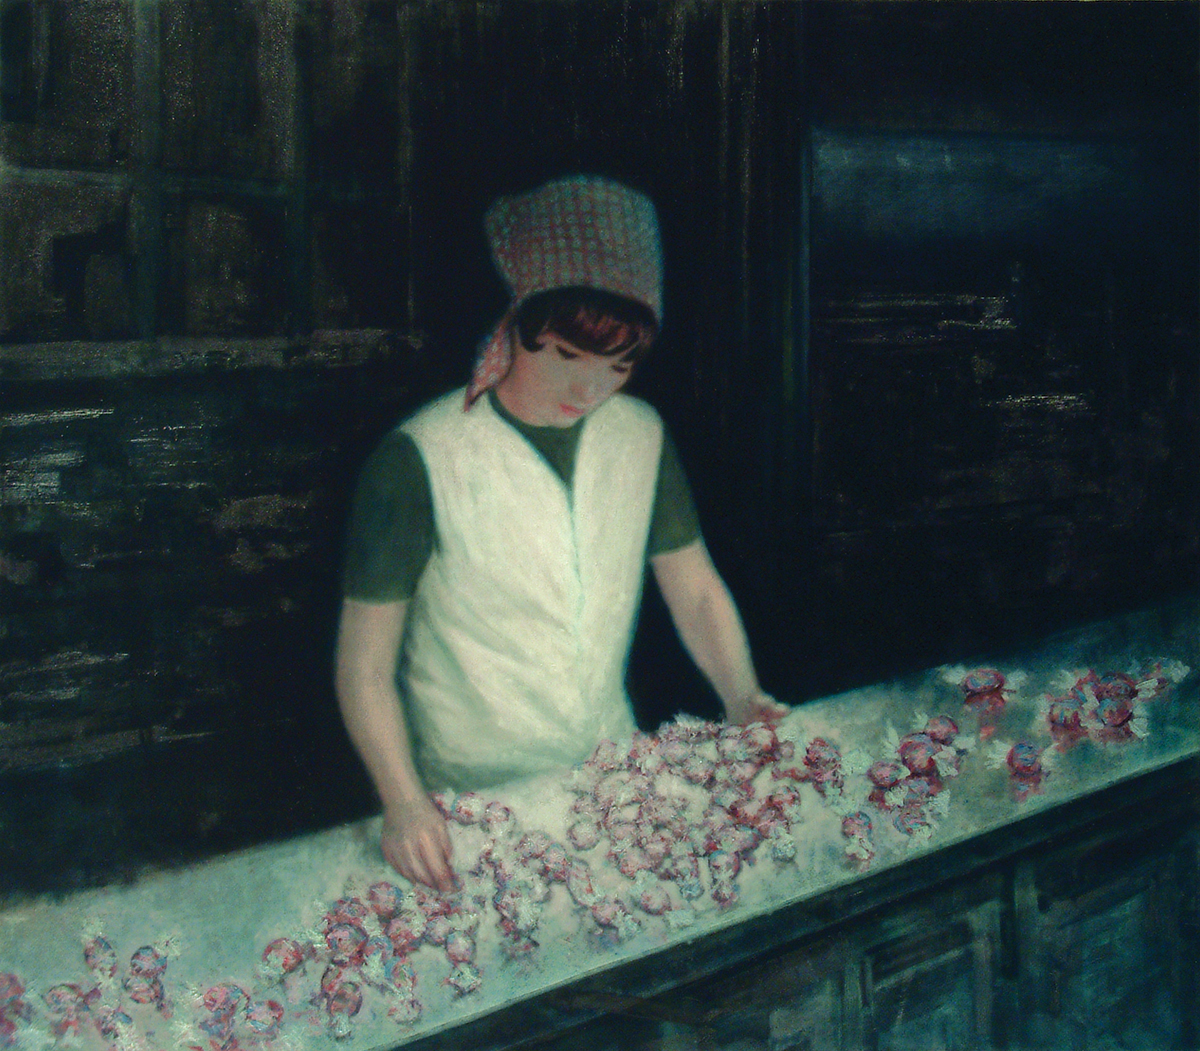 nightshift in the candy-sugar factory, oil on canvas, 150x170cm 2002